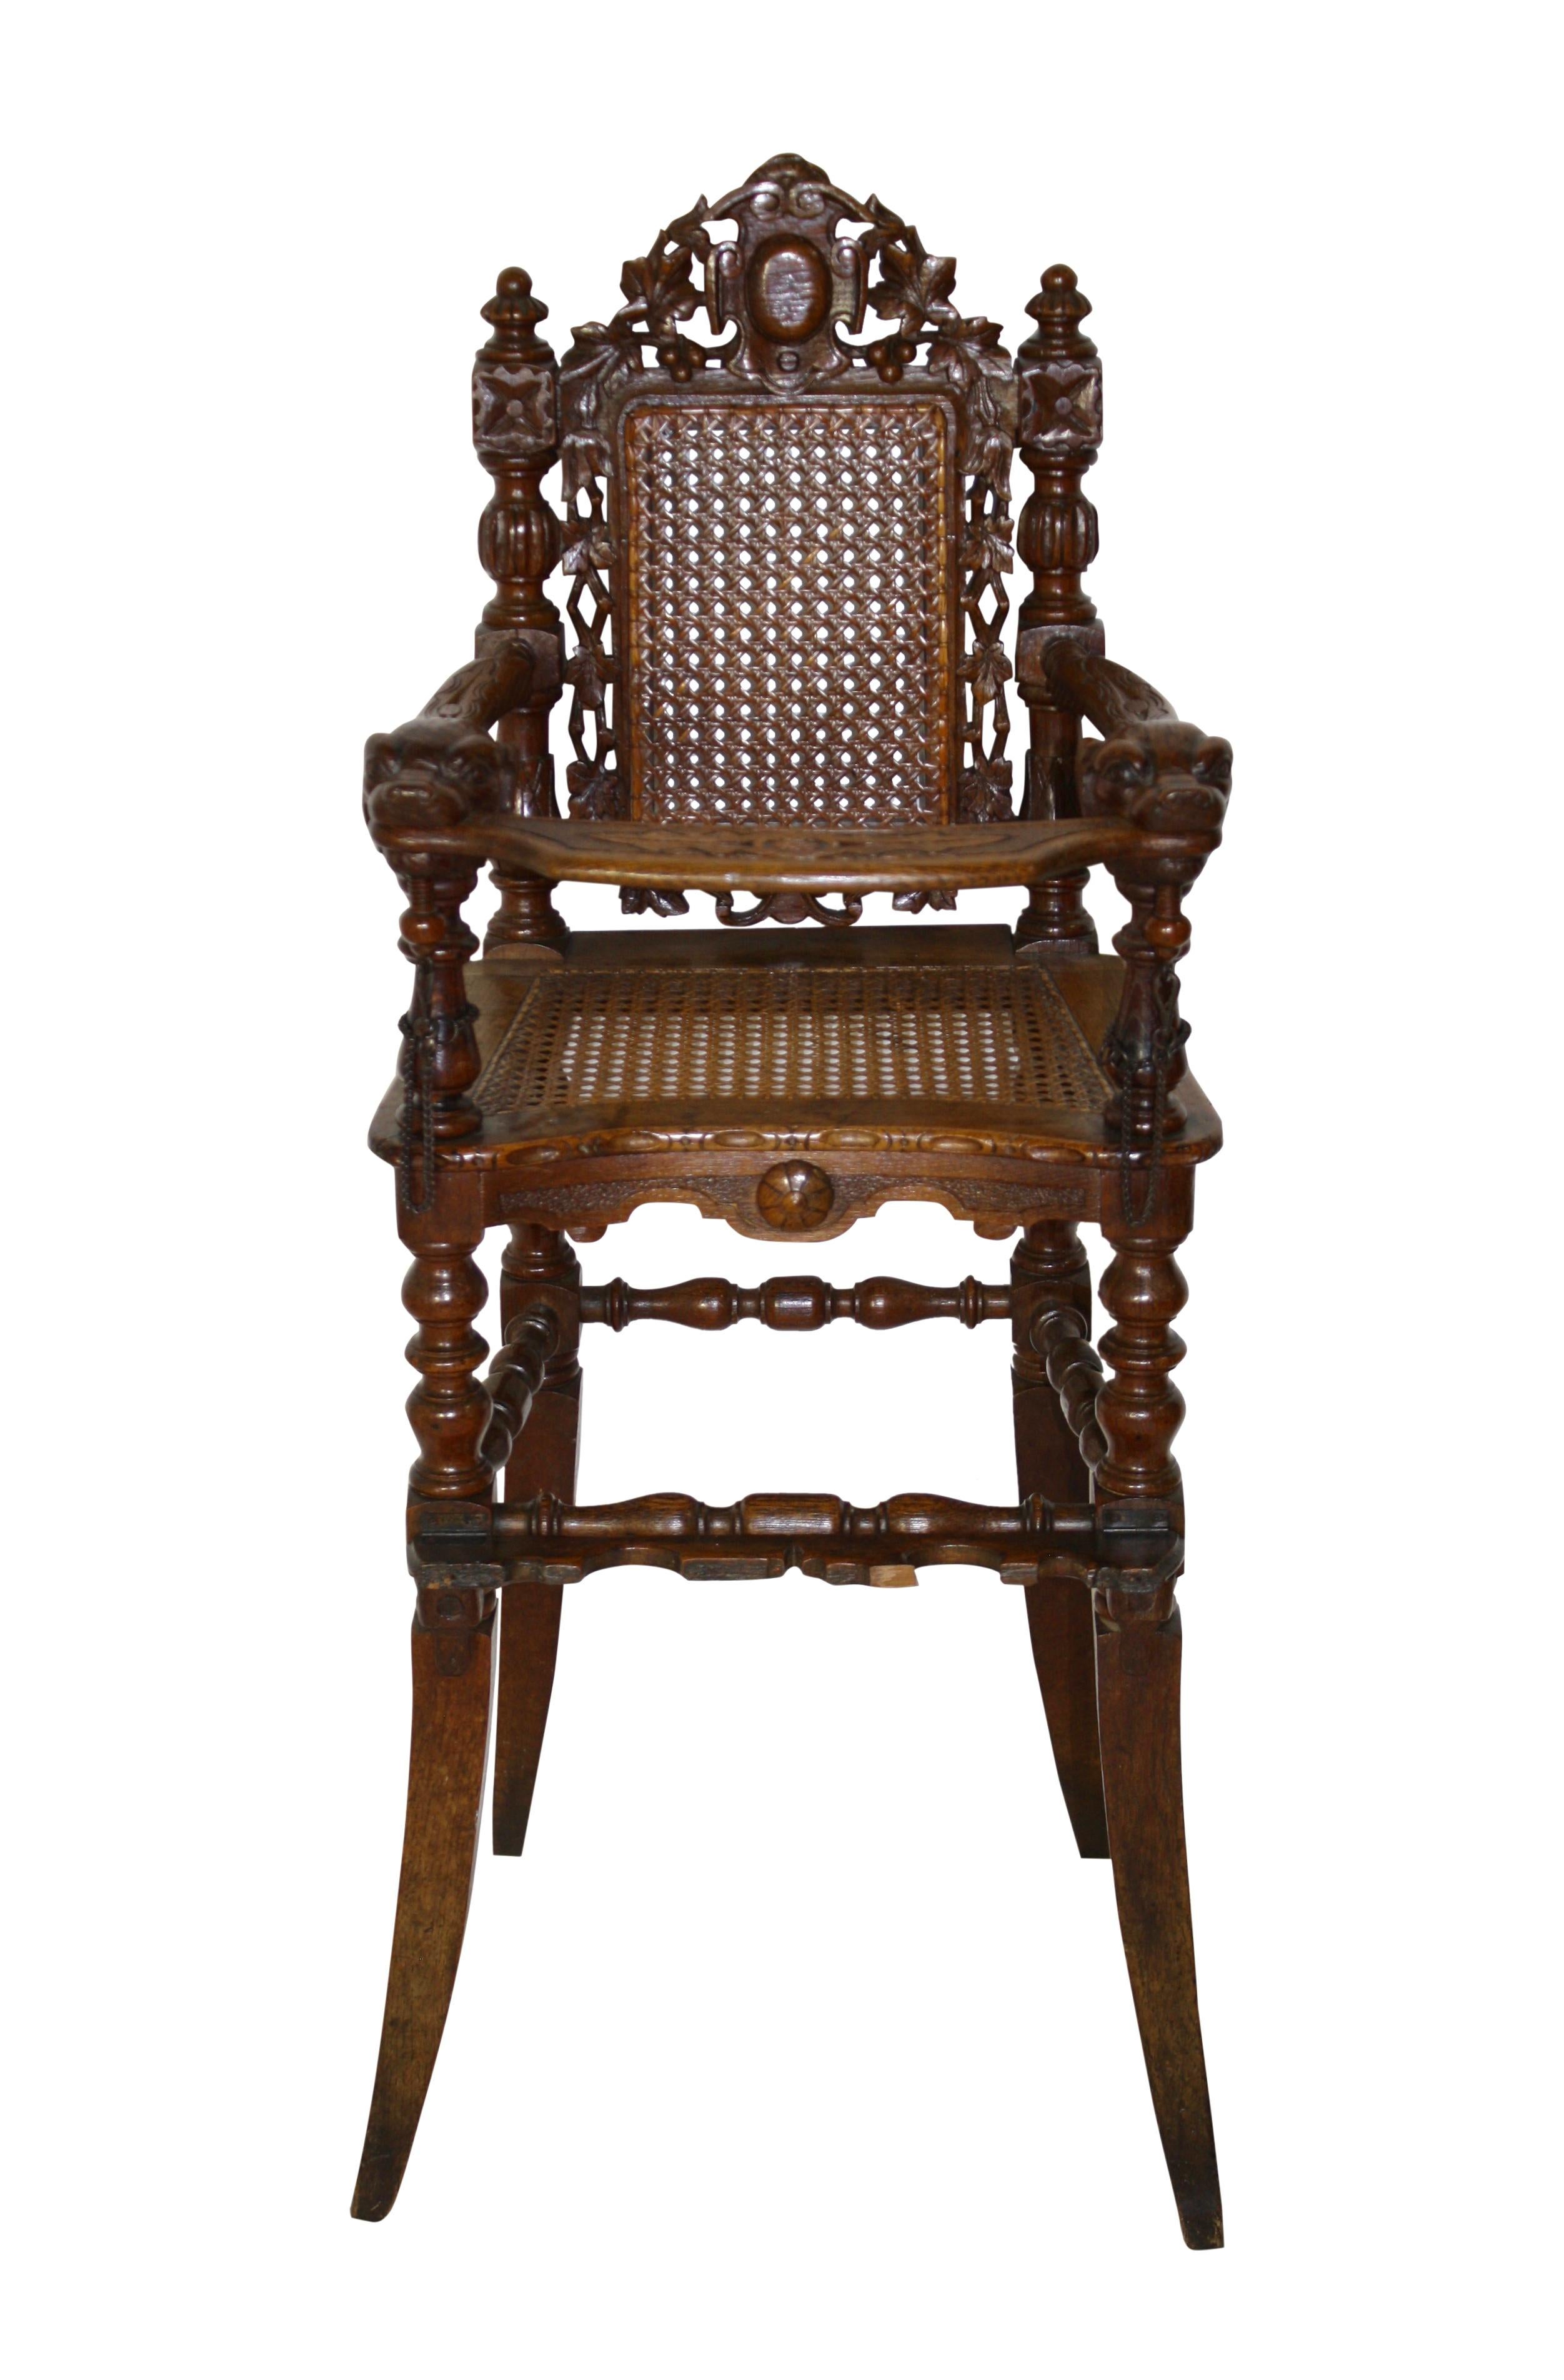 This adorable child's chair looks like the seat of honor. Turned and blocked stiles capped with knob finials secure a caned back with a pierced frame of carved grapes on a vine flowing down around a center medallion. Carved dogs' heads at the end of